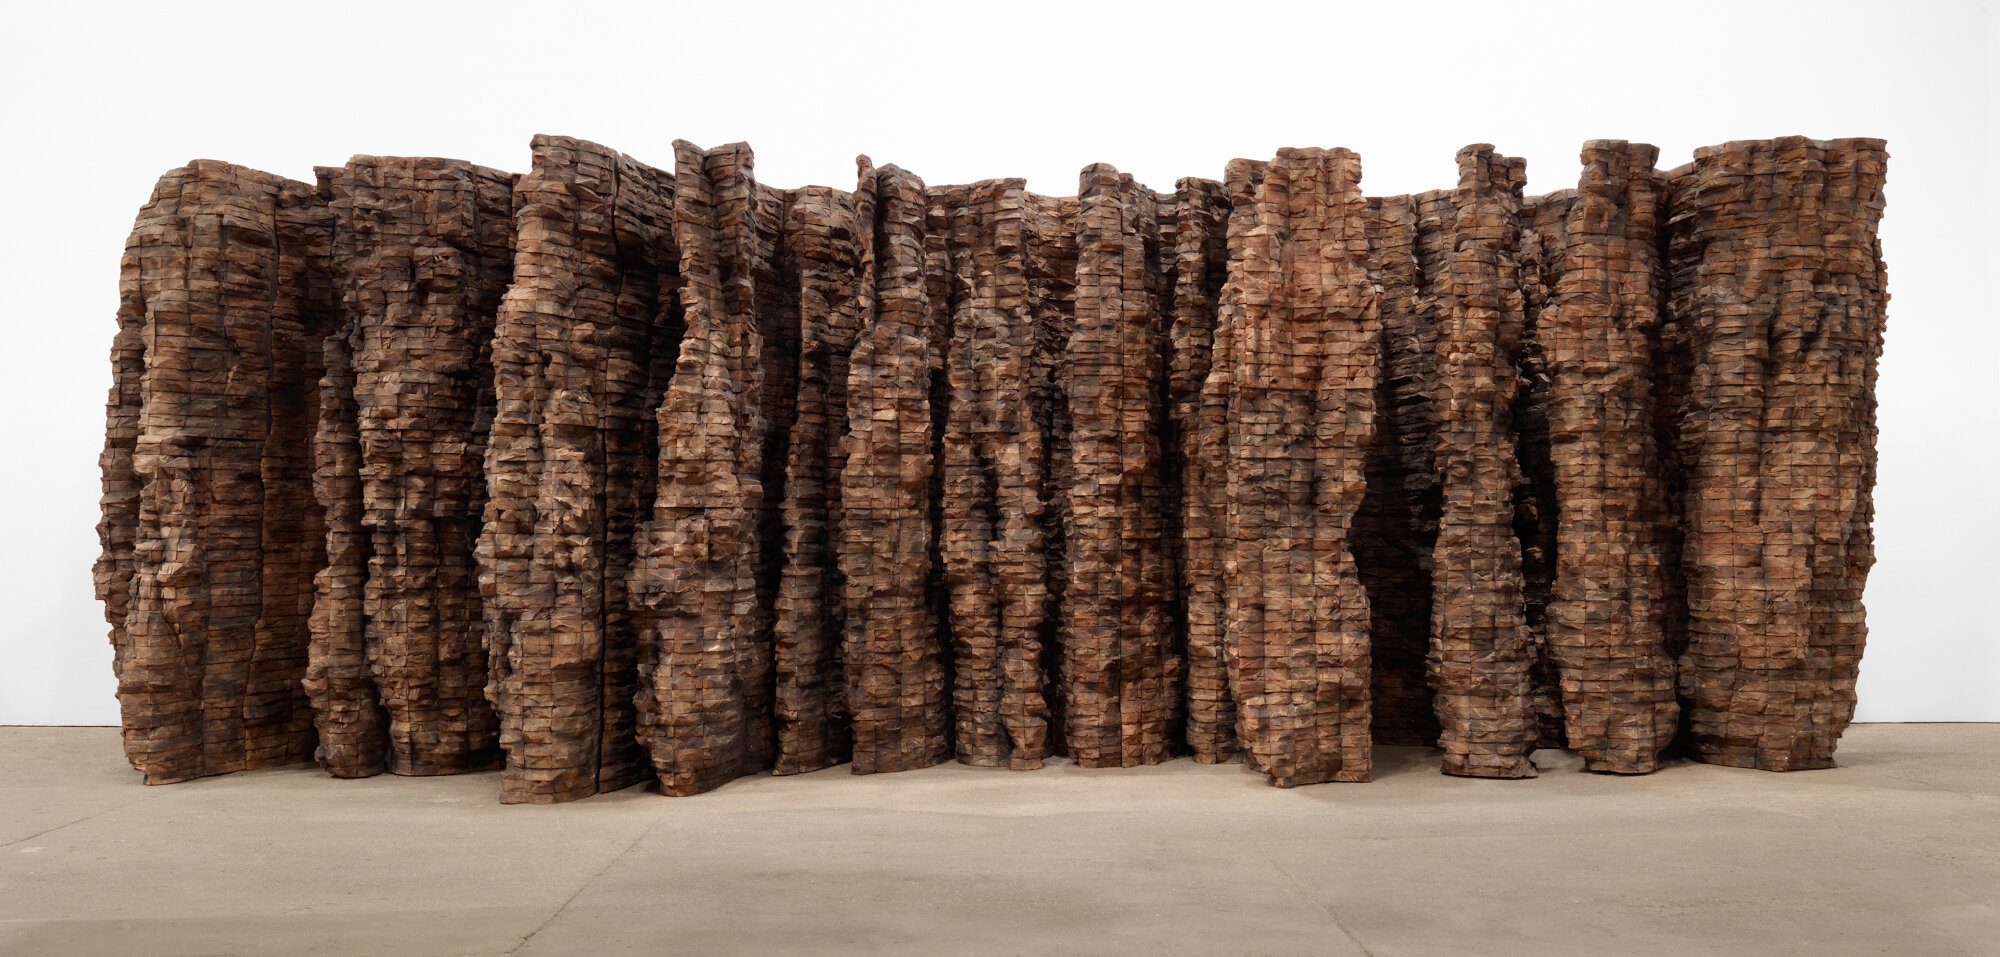       Blackened Word , 2008 Cedar and graphite 81 x 248 x 78 in.    MORE IMAGES   Yorkshire Sculpture Park  